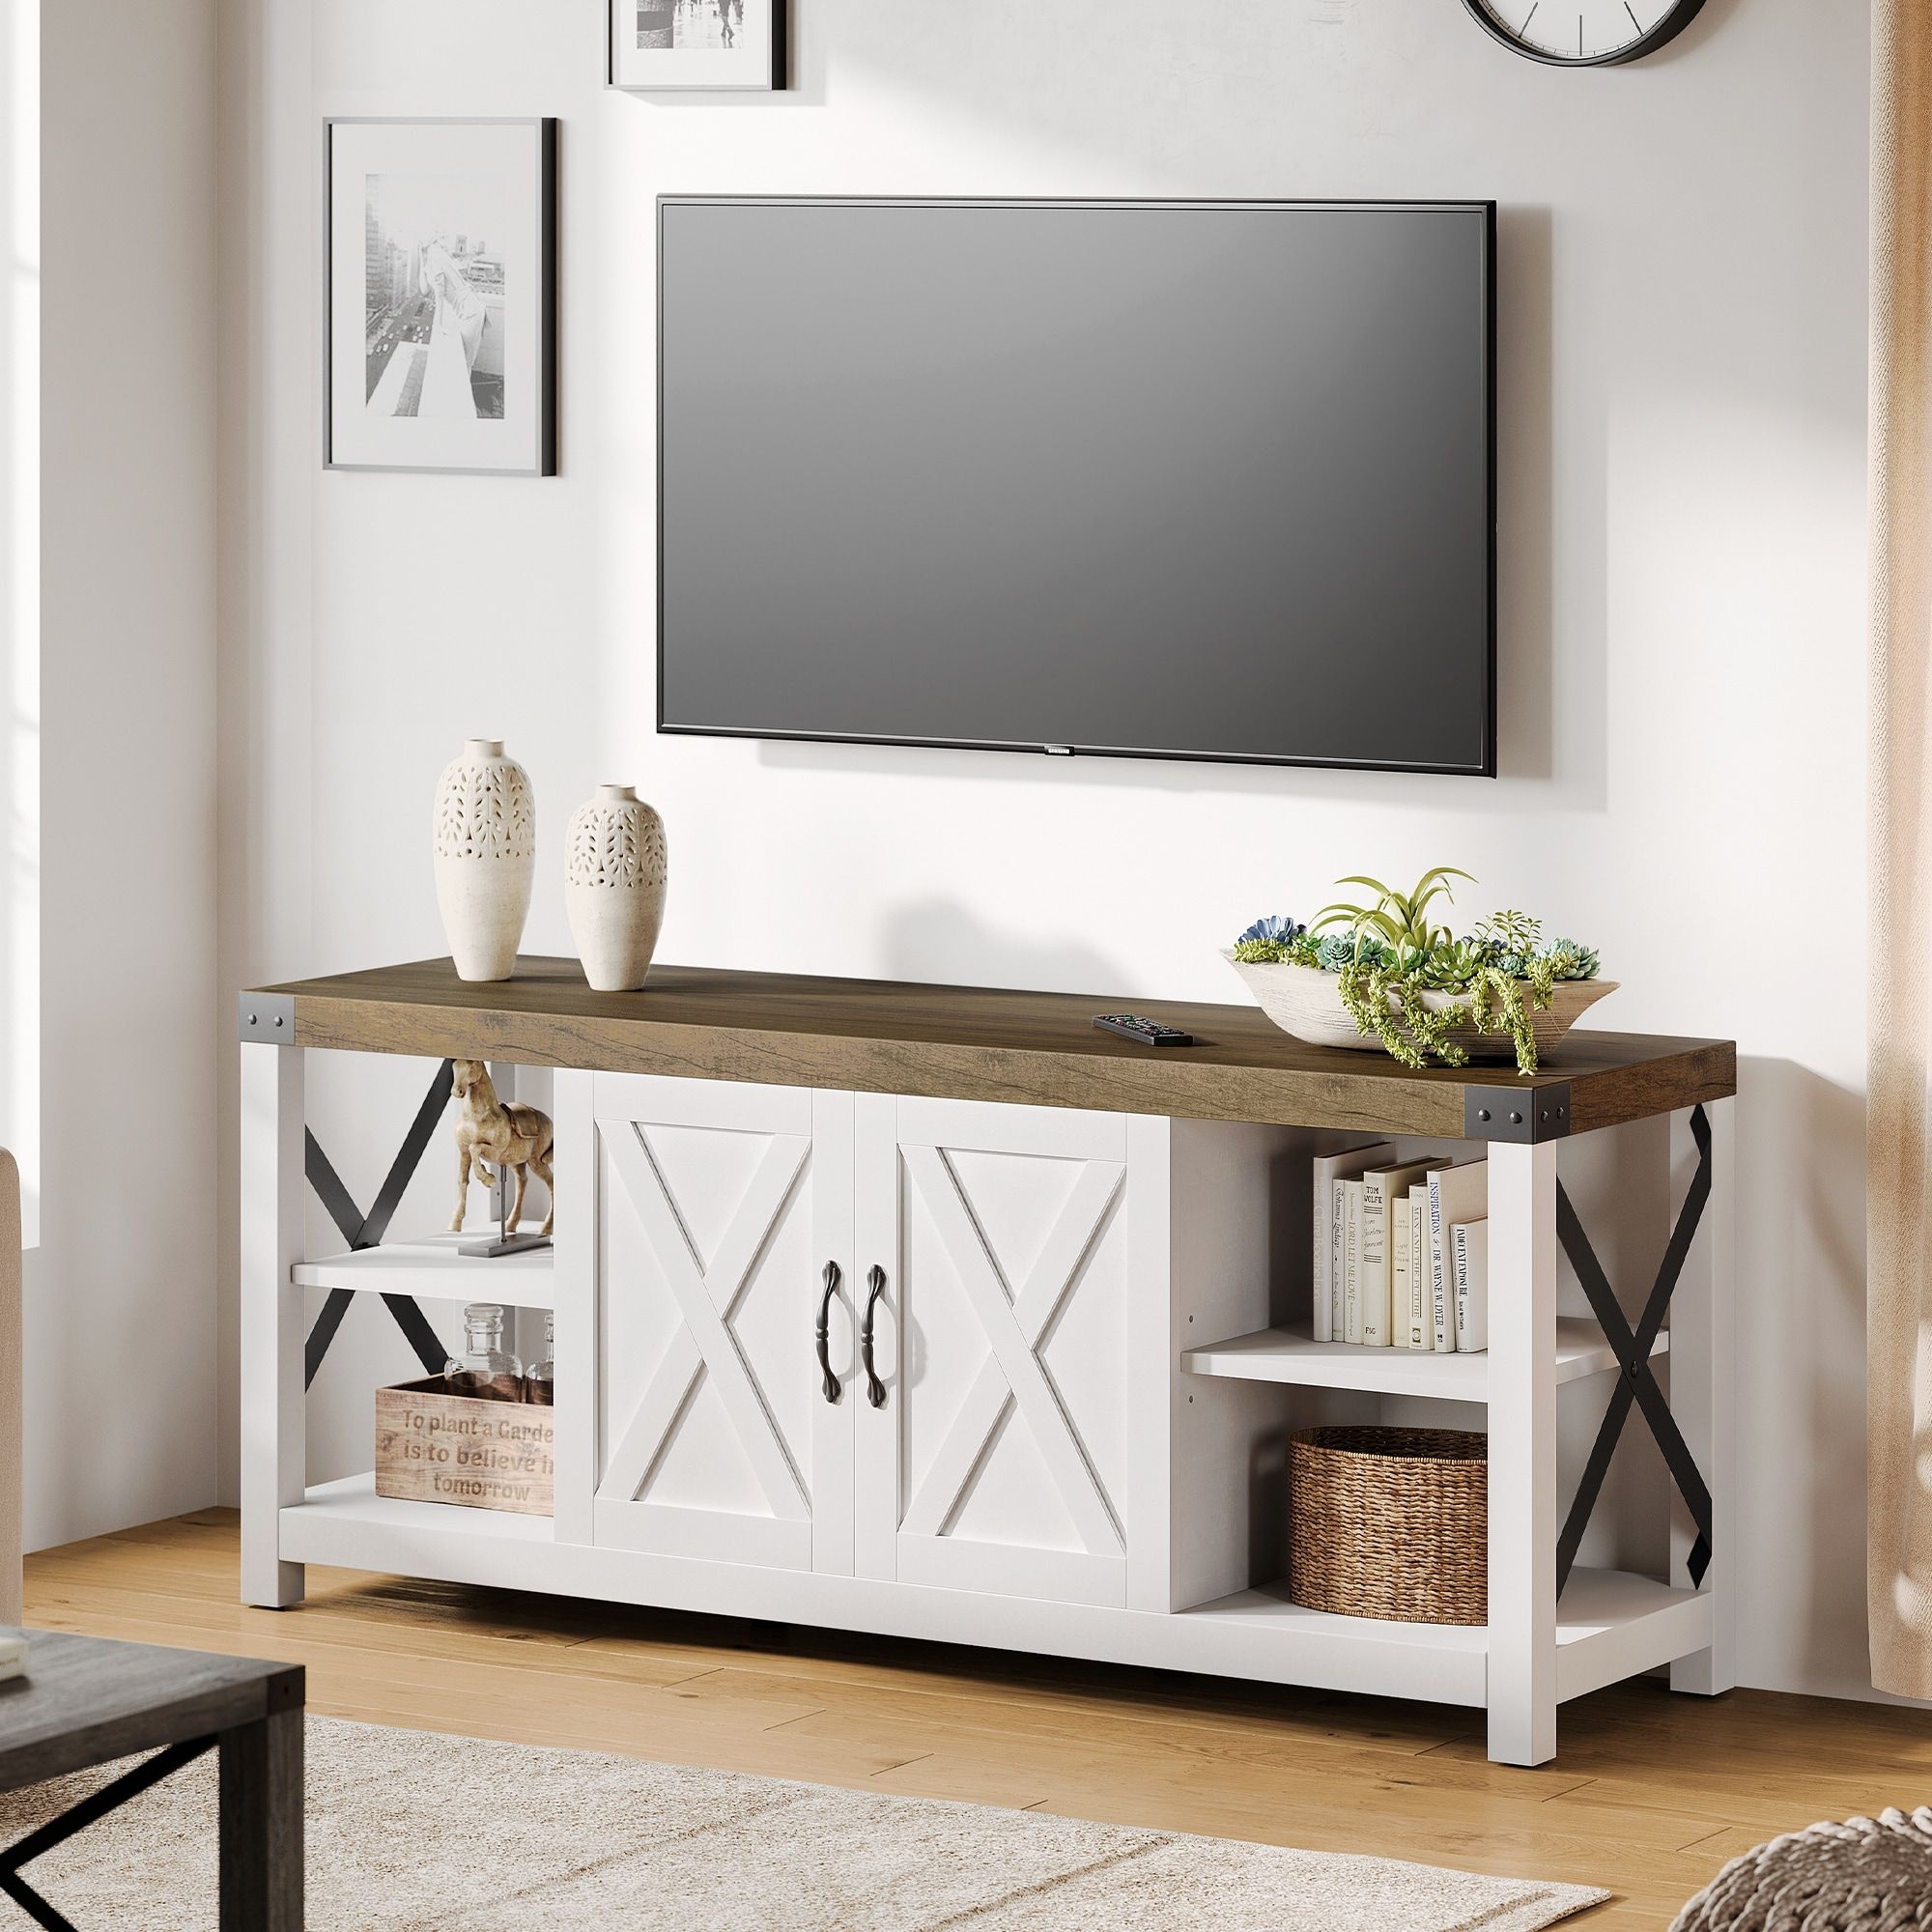 59 Inch Tv Stand For Tv Up To 50 60 65 Inches, Farmhouse Wood Tv Cabinet  Entertainment Center – 59" – On Sale – Bed Bath & Beyond – 36742172 Within Farmhouse Stands For Tvs (View 13 of 15)